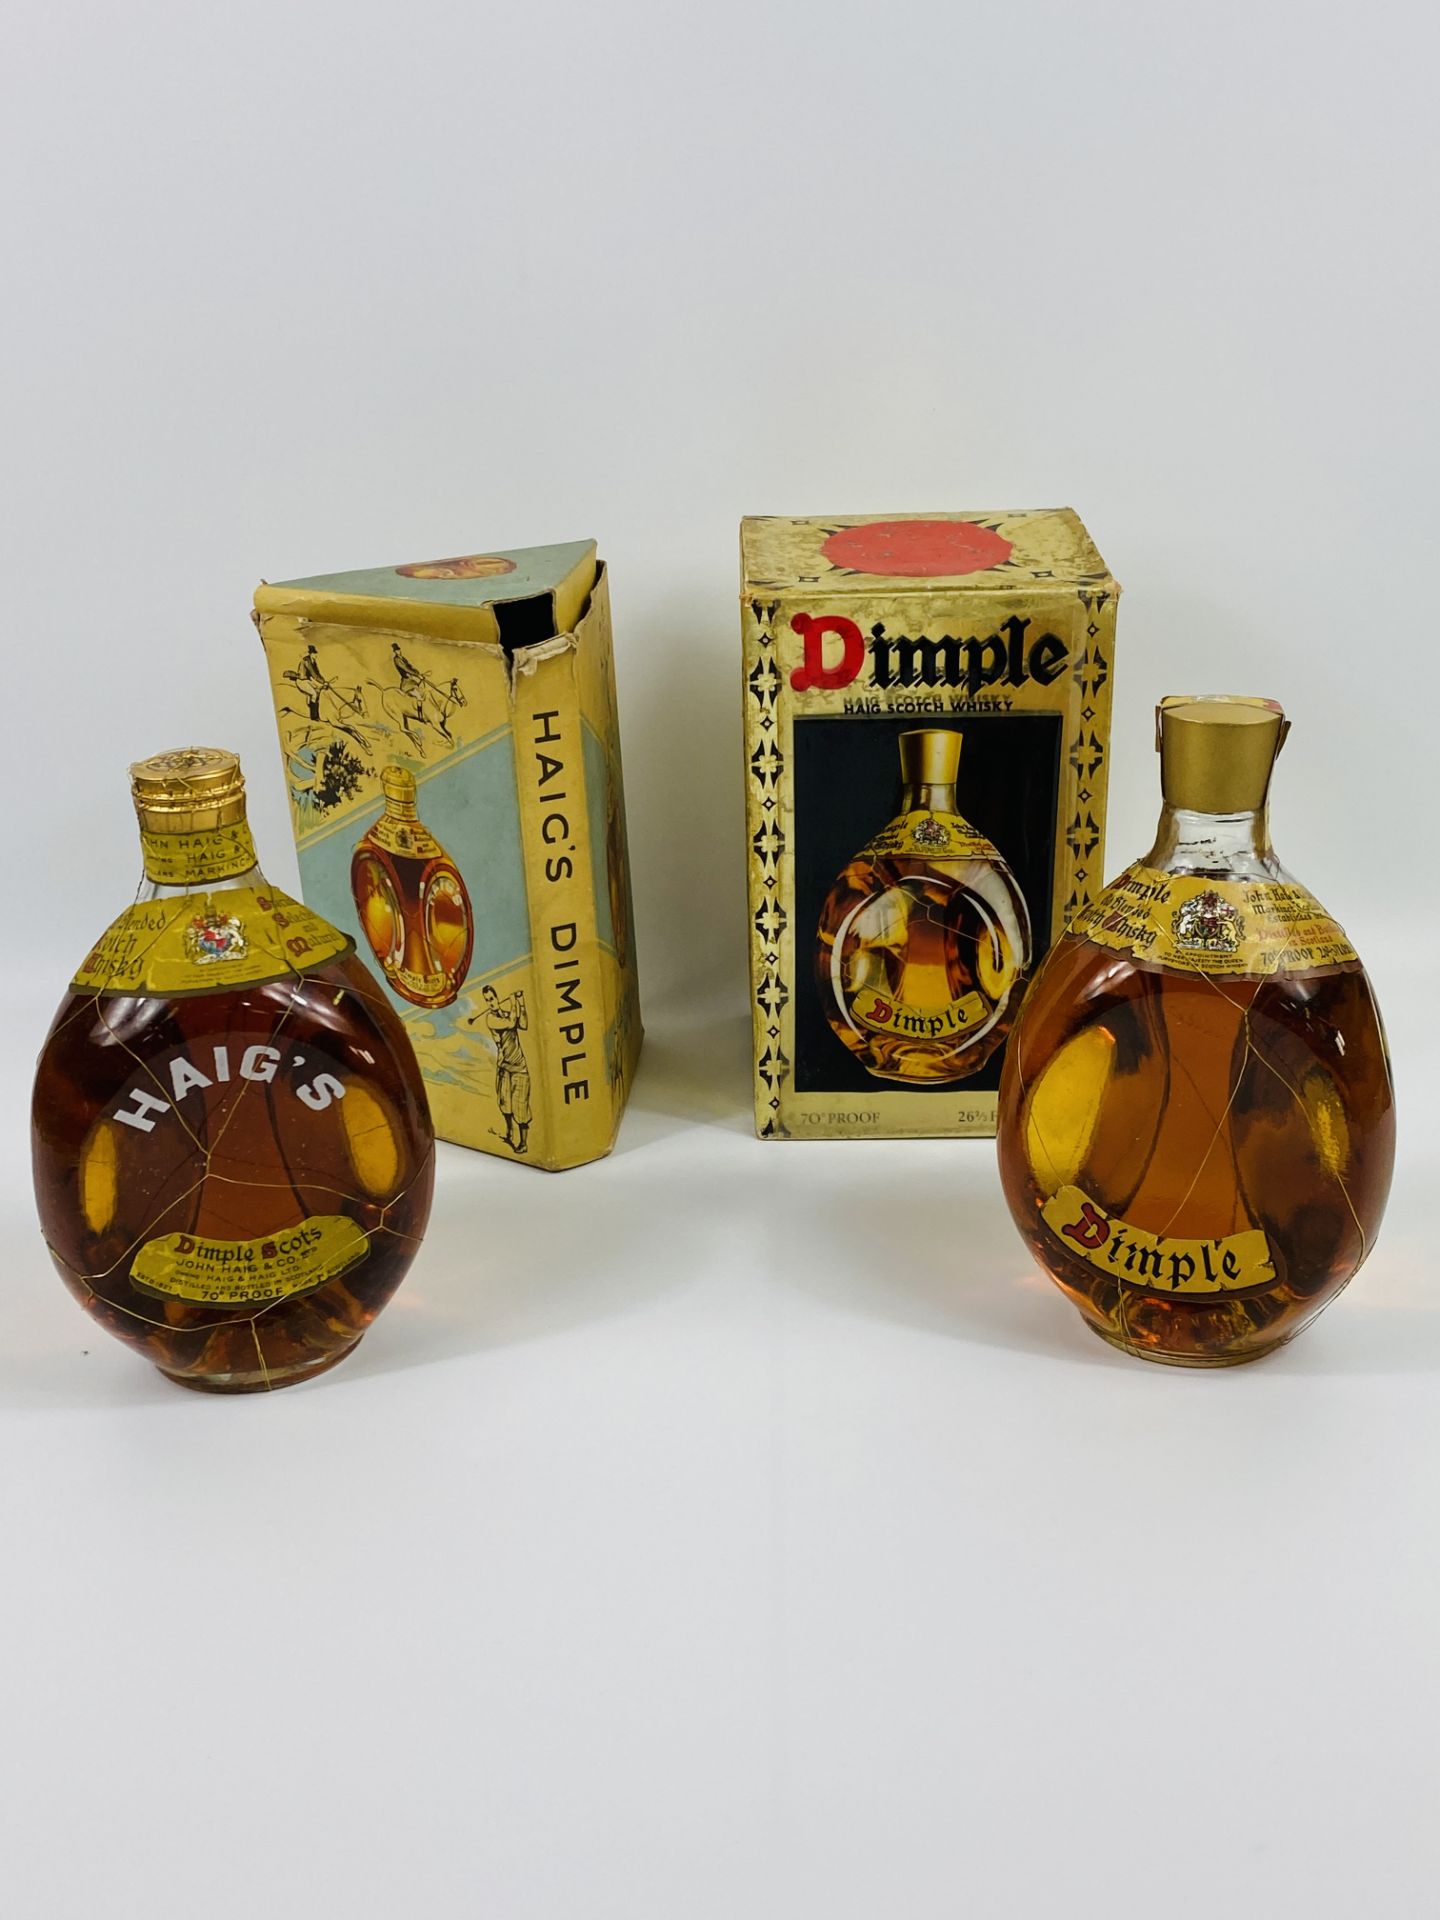 Two bottles of Dimple Scotch whisky